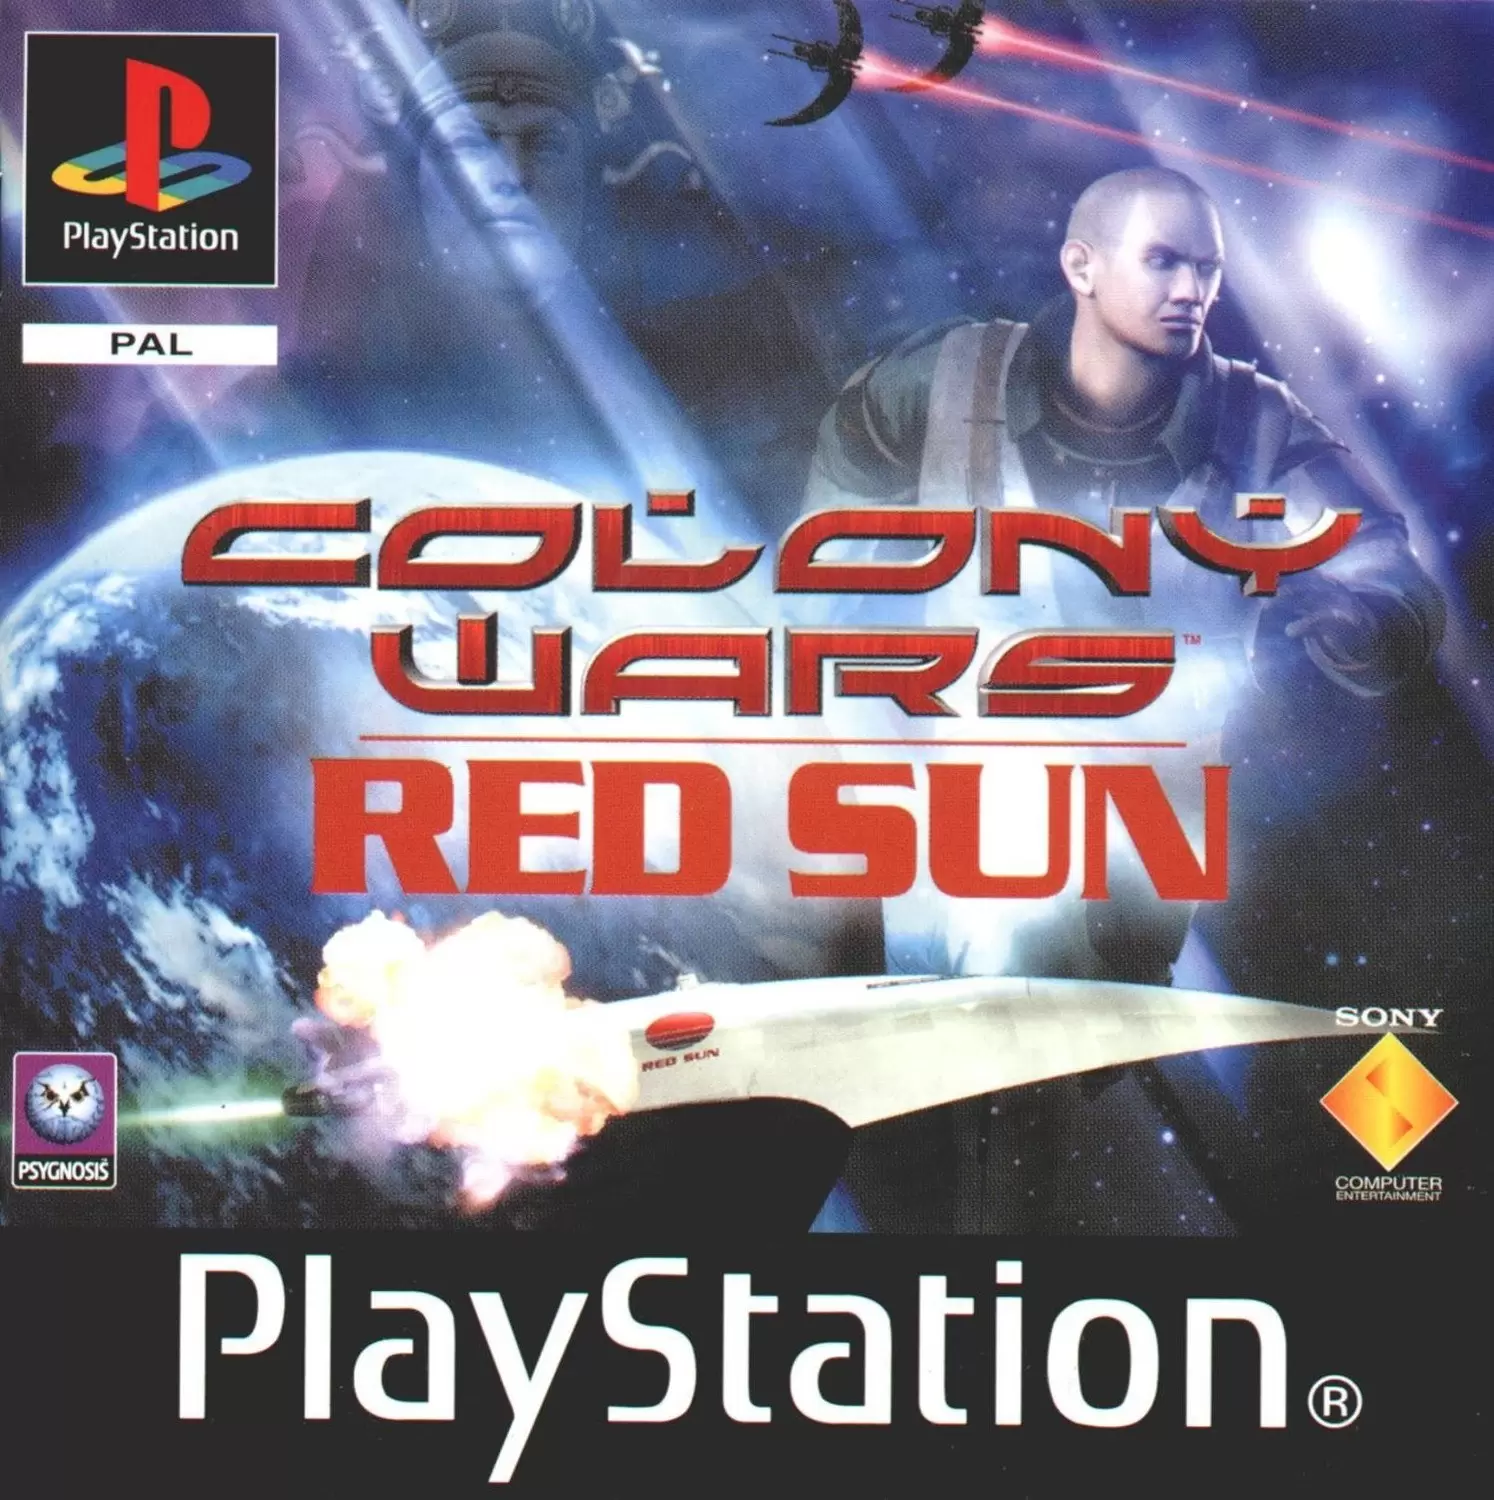 Playstation games - Colony Wars: Red Sun